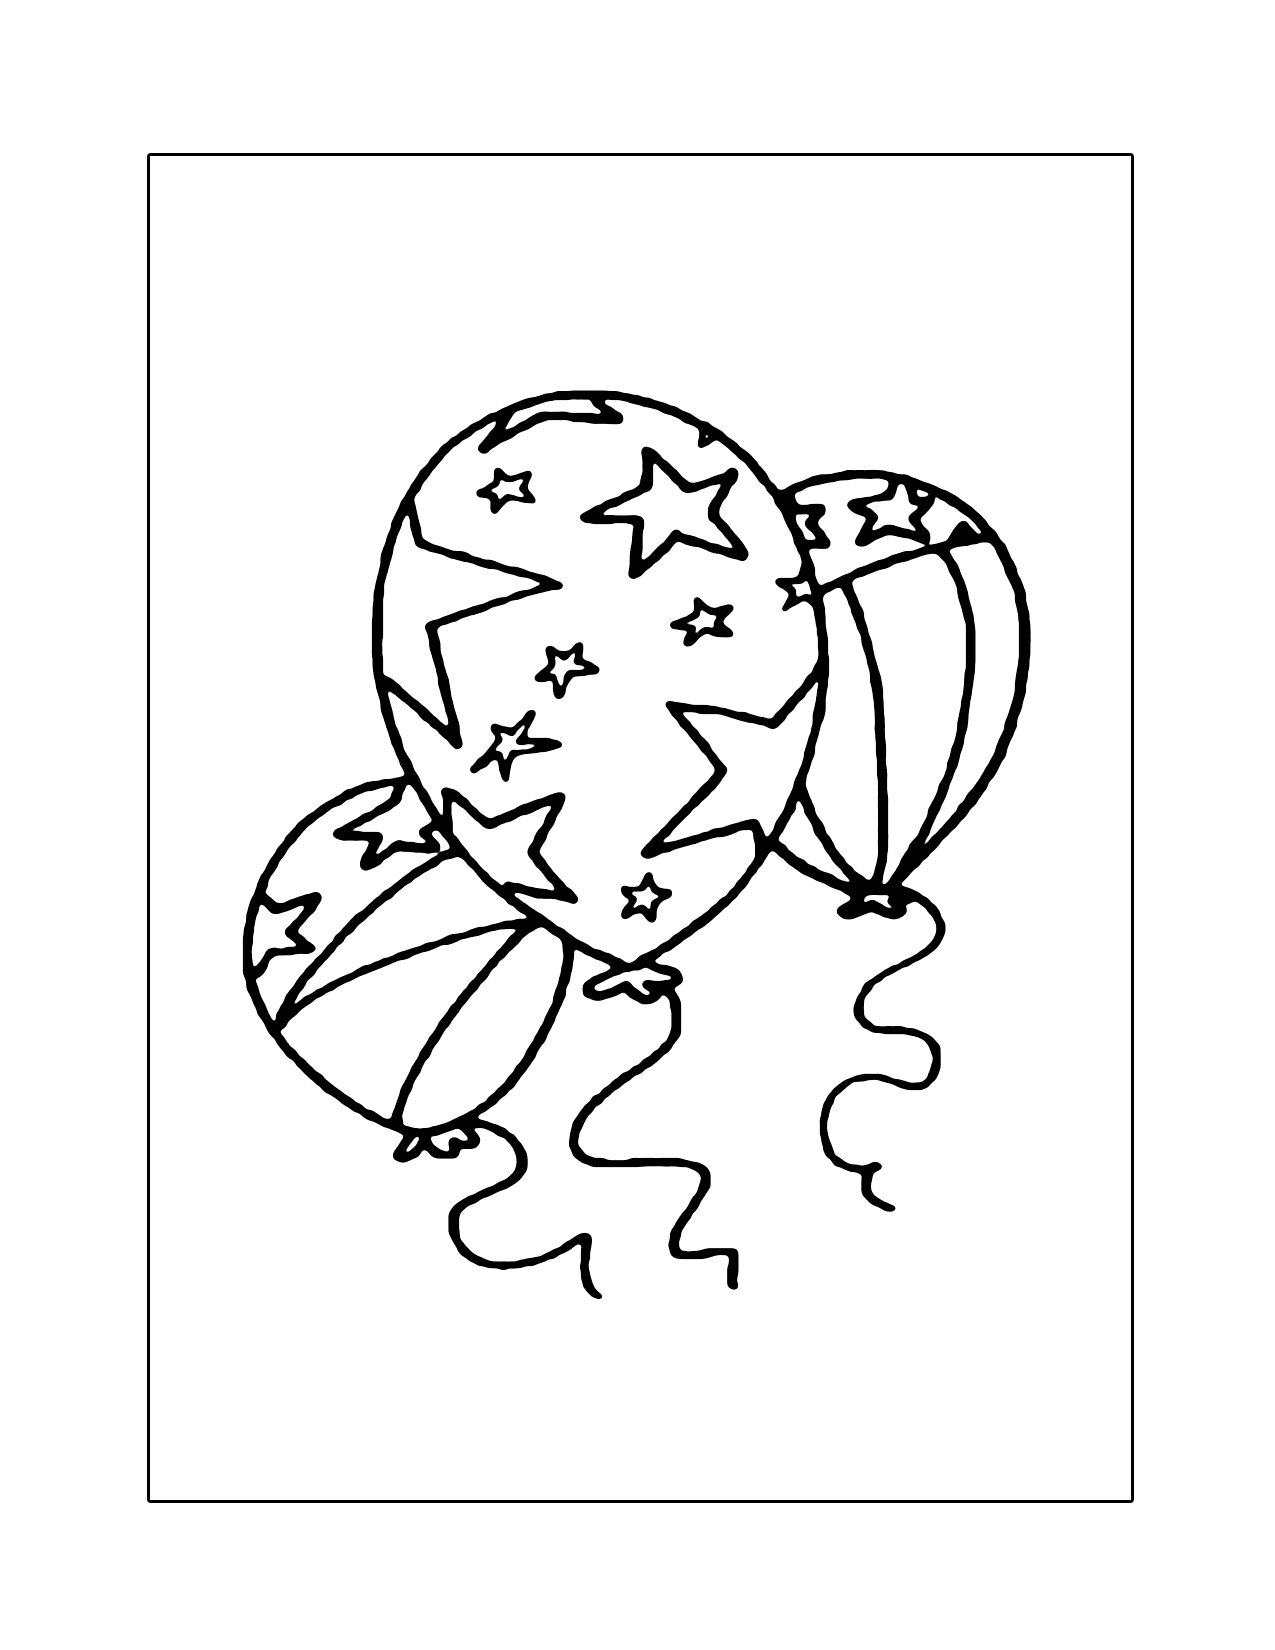 Decorated Balloons Coloring Page